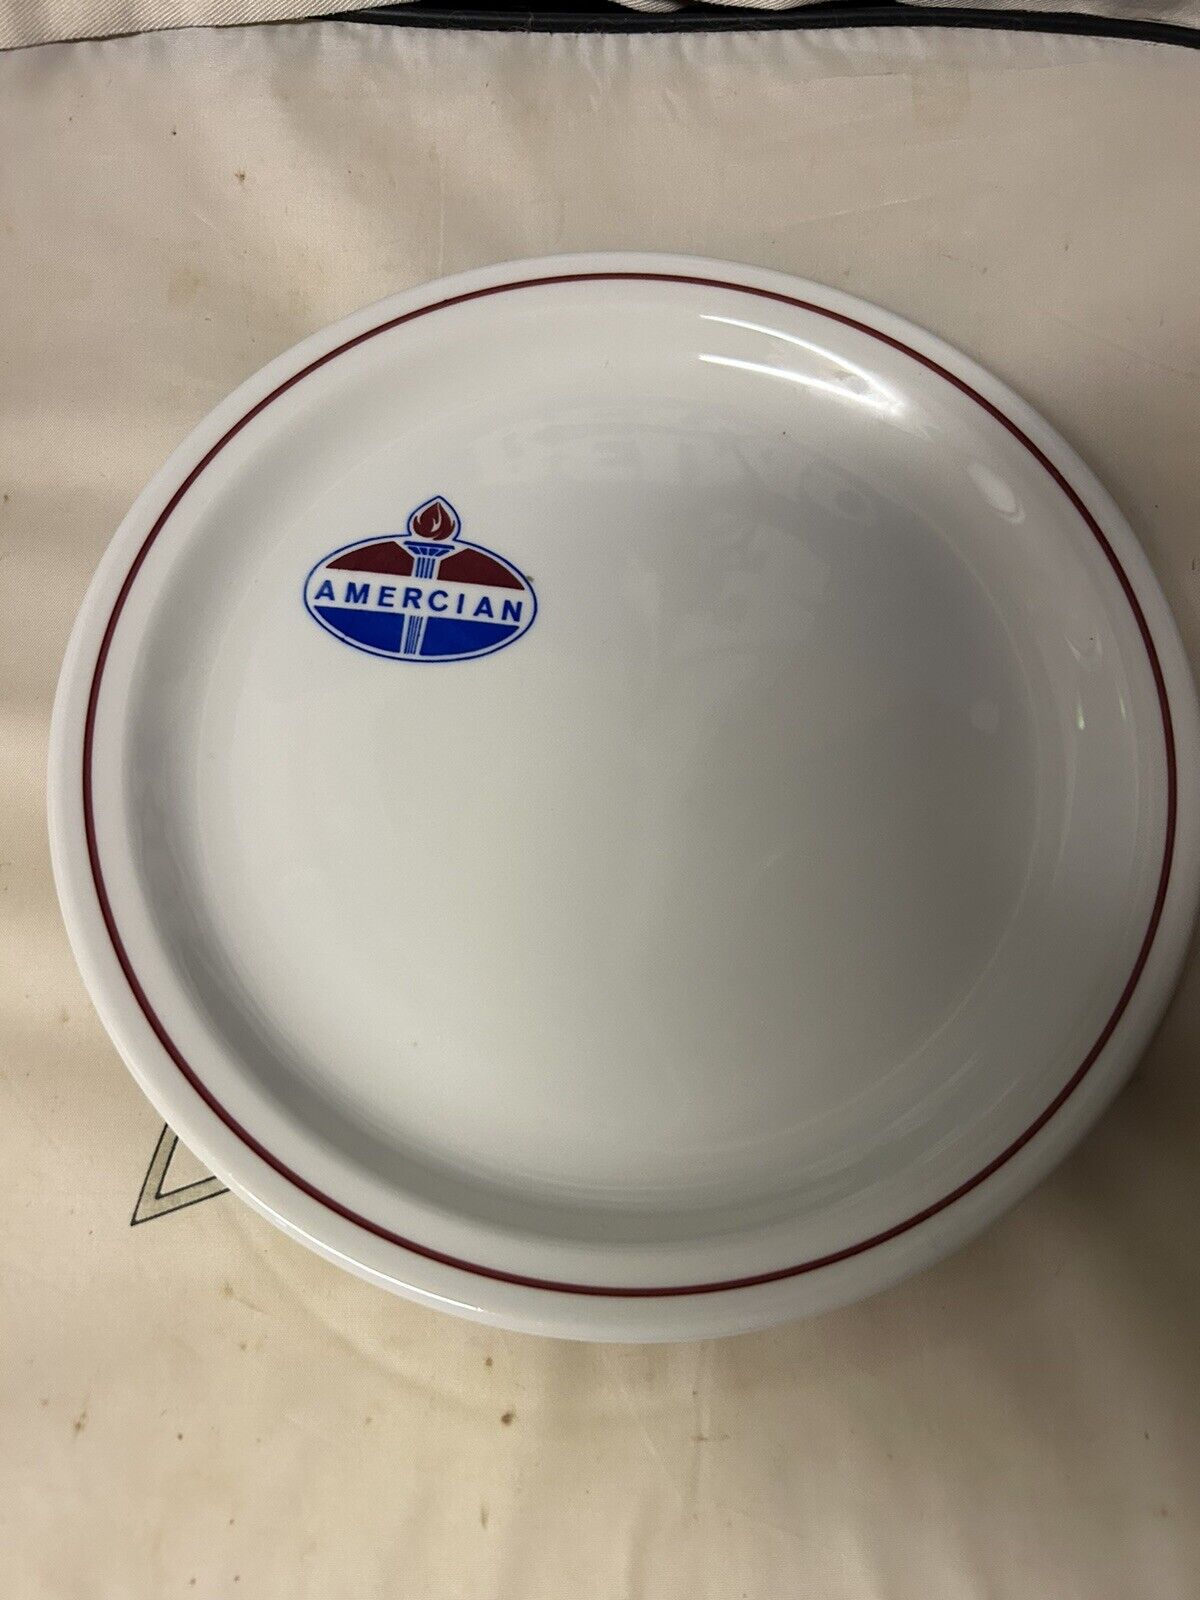 Vintage American Oil And Gas Advertisement Restiarant Ware Dinner Plate 